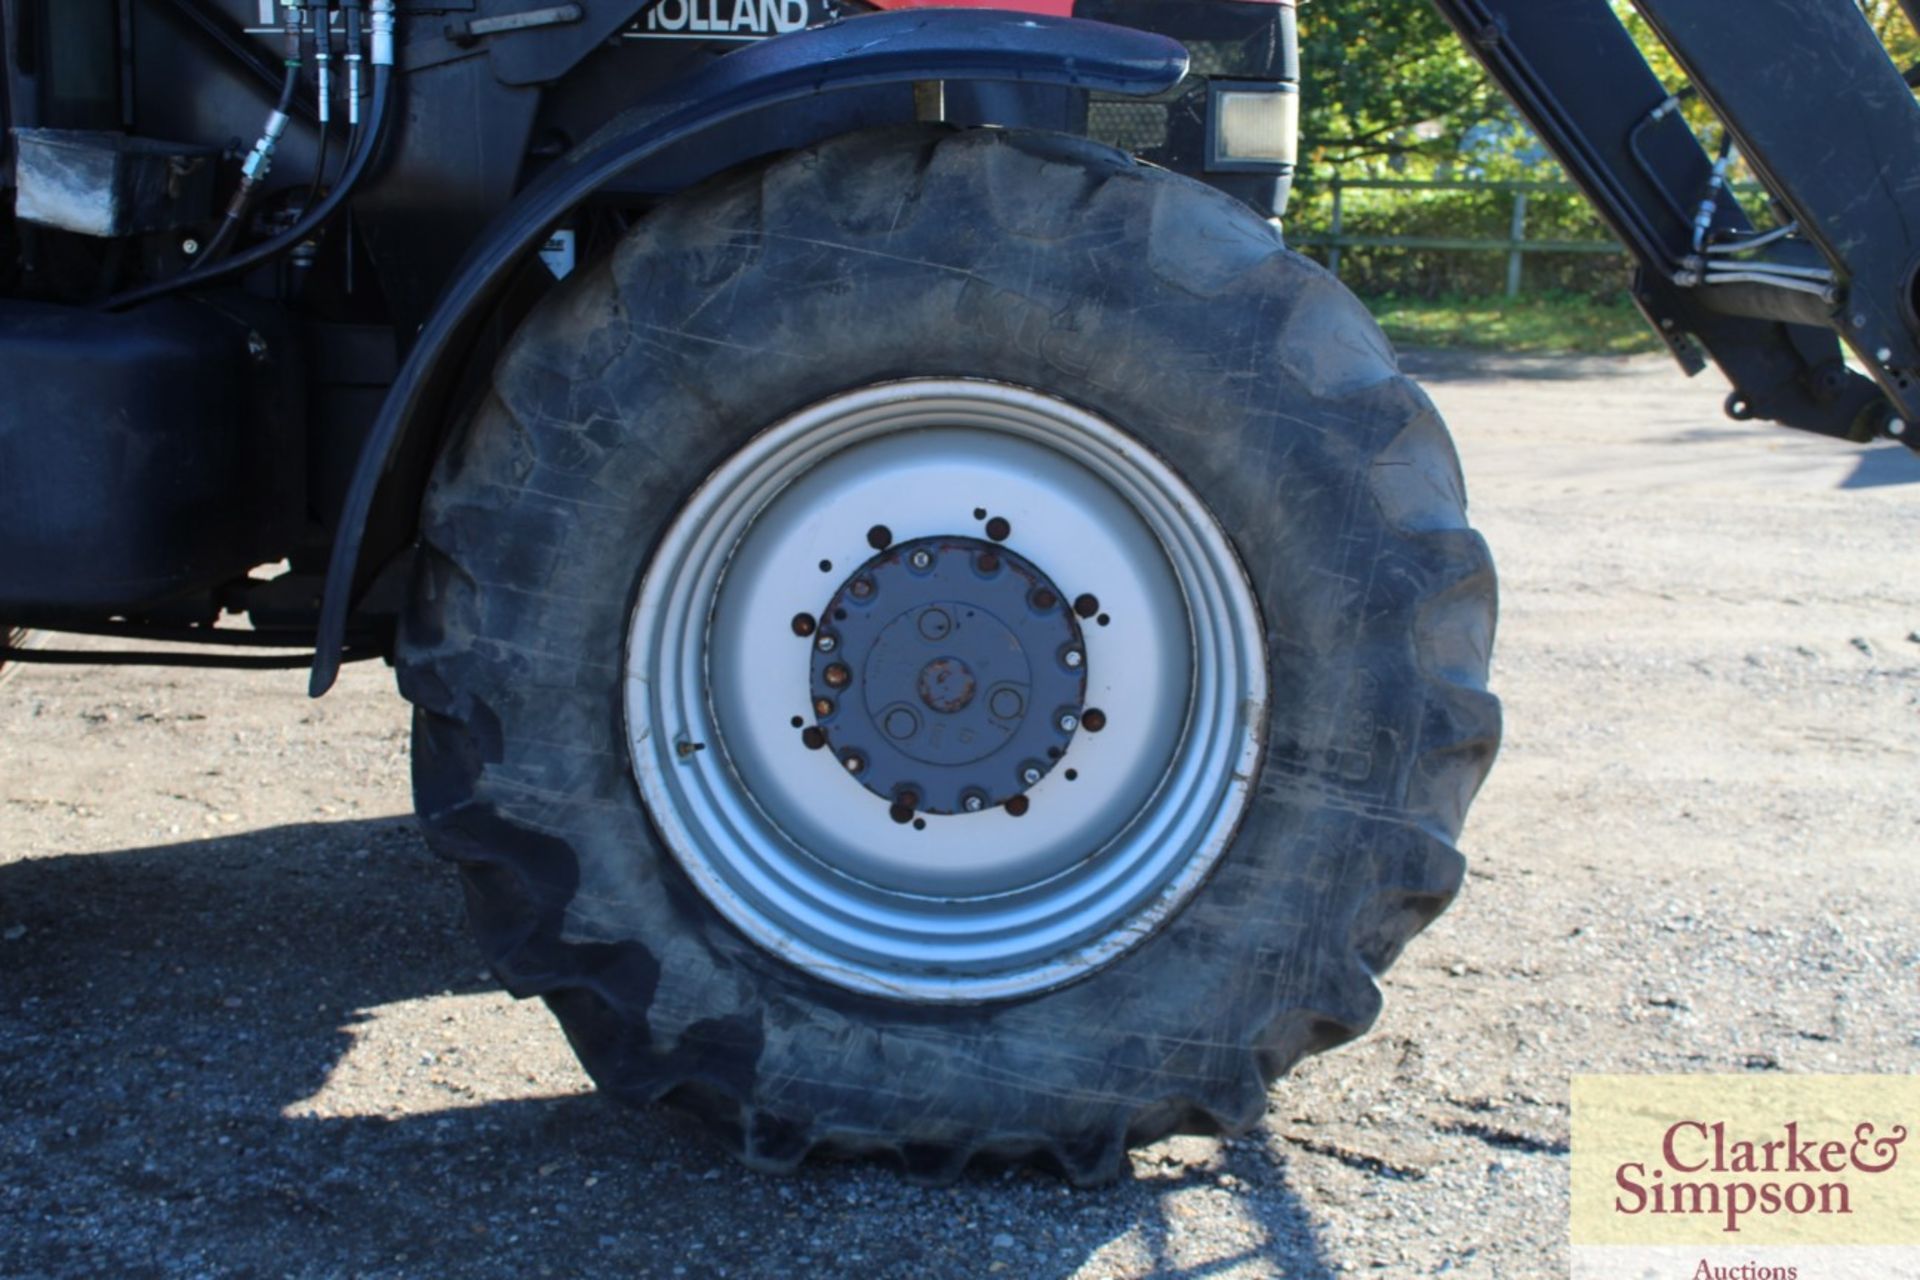 New Holland TM150 4WD tractor. 28/10/2000. 11,839 hours. 520/85R42 rear wheels and tyres @ 60%. - Image 36 of 58